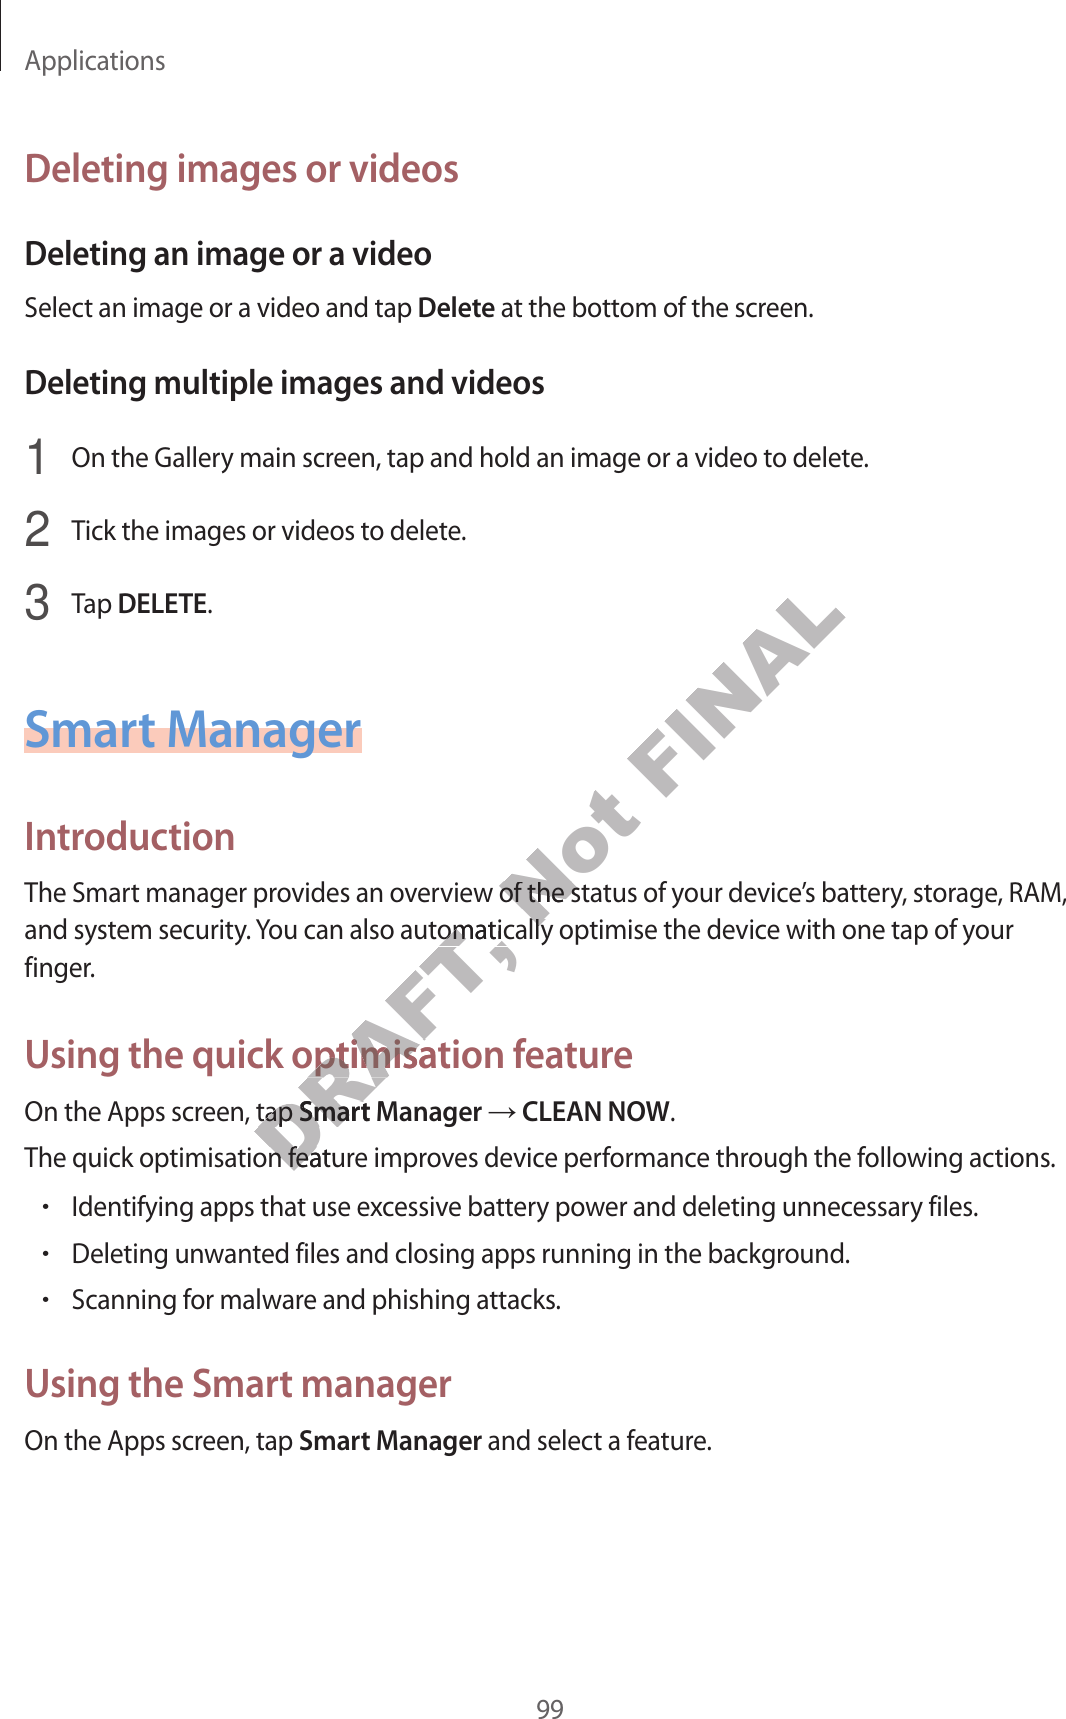 Applications99Deleting images or videosDeleting an image or a videoSelect an image or a video and tap Delete at the bottom of the screen.Deleting multiple images and videos1  On the Gallery main screen, tap and hold an image or a video to delete.2  Tick the images or videos to delete.3  Tap DELETE.Smart ManagerIntroductionThe Smart manager provides an overview of the status of your device’s battery, storage, RAM, and system security. You can also automatically optimise the device with one tap of your finger.Using the quick optimisation featureOn the Apps screen, tap Smart Manager  CLEAN NOW.The quick optimisation feature improves device performance through the following actions.•Identifying apps that use excessive battery power and deleting unnecessary files.•Deleting unwanted files and closing apps running in the background.•Scanning for malware and phishing attacks.Using the Smart managerOn the Apps screen, tap Smart Manager and select a feature.DRAFT, view of the staou can also automatically optimise the devicou can also automatically optimise the devicsing the quick optimisation fsing the quick optimisaeen, tap een, tap DRAFT, Smart MSmart Mtion featurtion feaNot view of the staview of the statically optimise the devictically optimise the devicFINAL